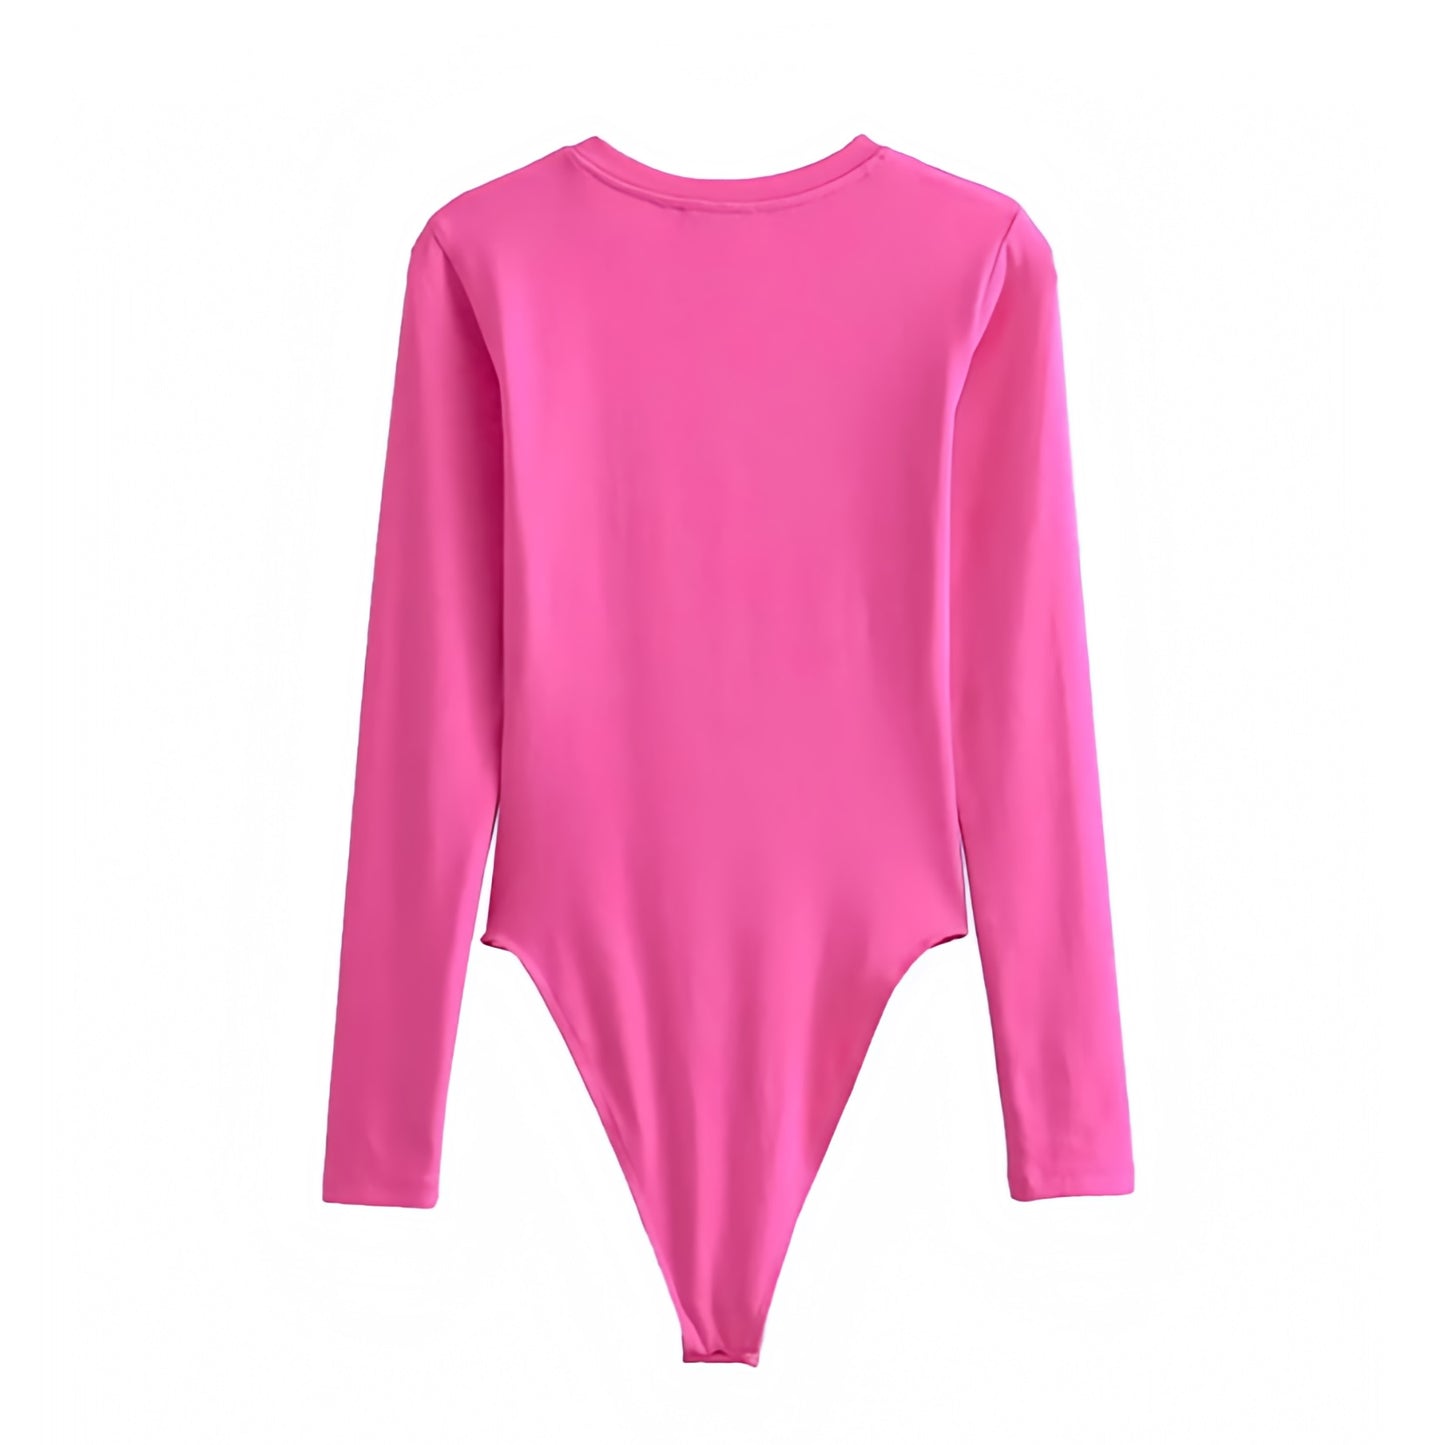 hot-bright-pink-cotton-bodycon-slim-tight-fitted-long-sleeve-round-neck-one-piece-bodysuit-top-under-shirt-comfy-cozy-stretchable-lounge-wear-women-ladies-spring-2024-summer-casual-chic-basic-preppy-style-essential-minimalist-sexy-spandex-feminine-skims-dupe-zara-revolve-aritzia